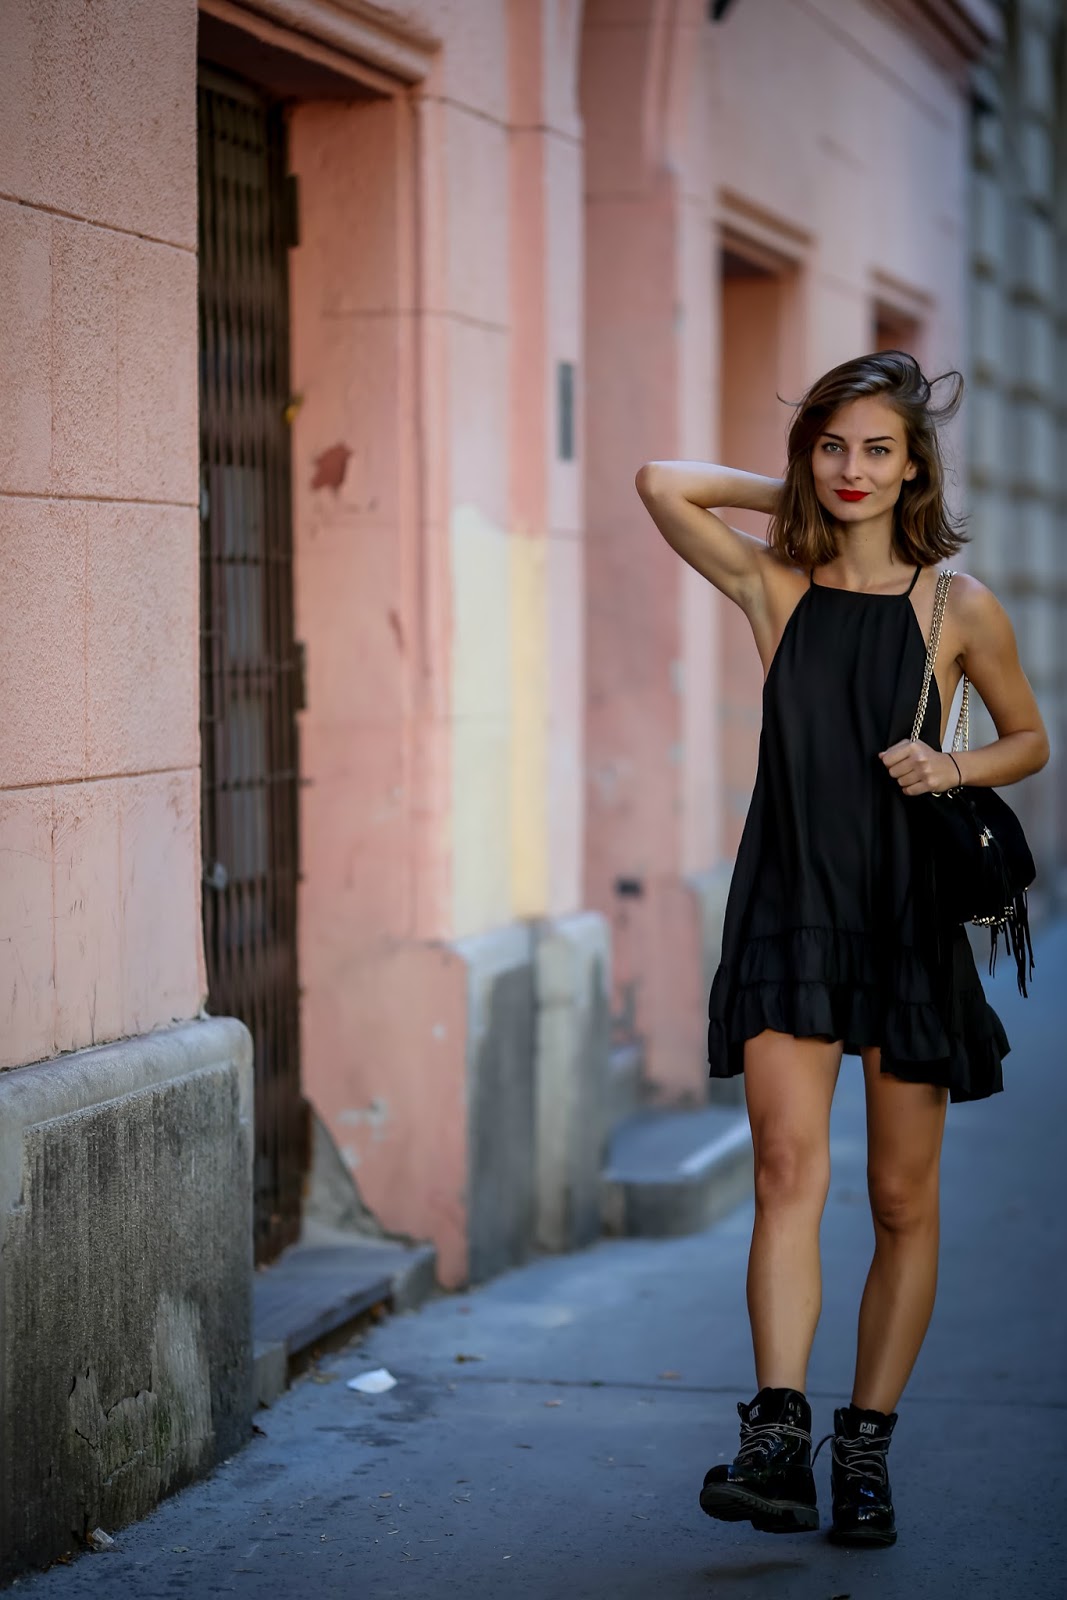 WEARING A RUFFLED SLIP DRESS WITH COMBAT BOOTS | What Vero Wears